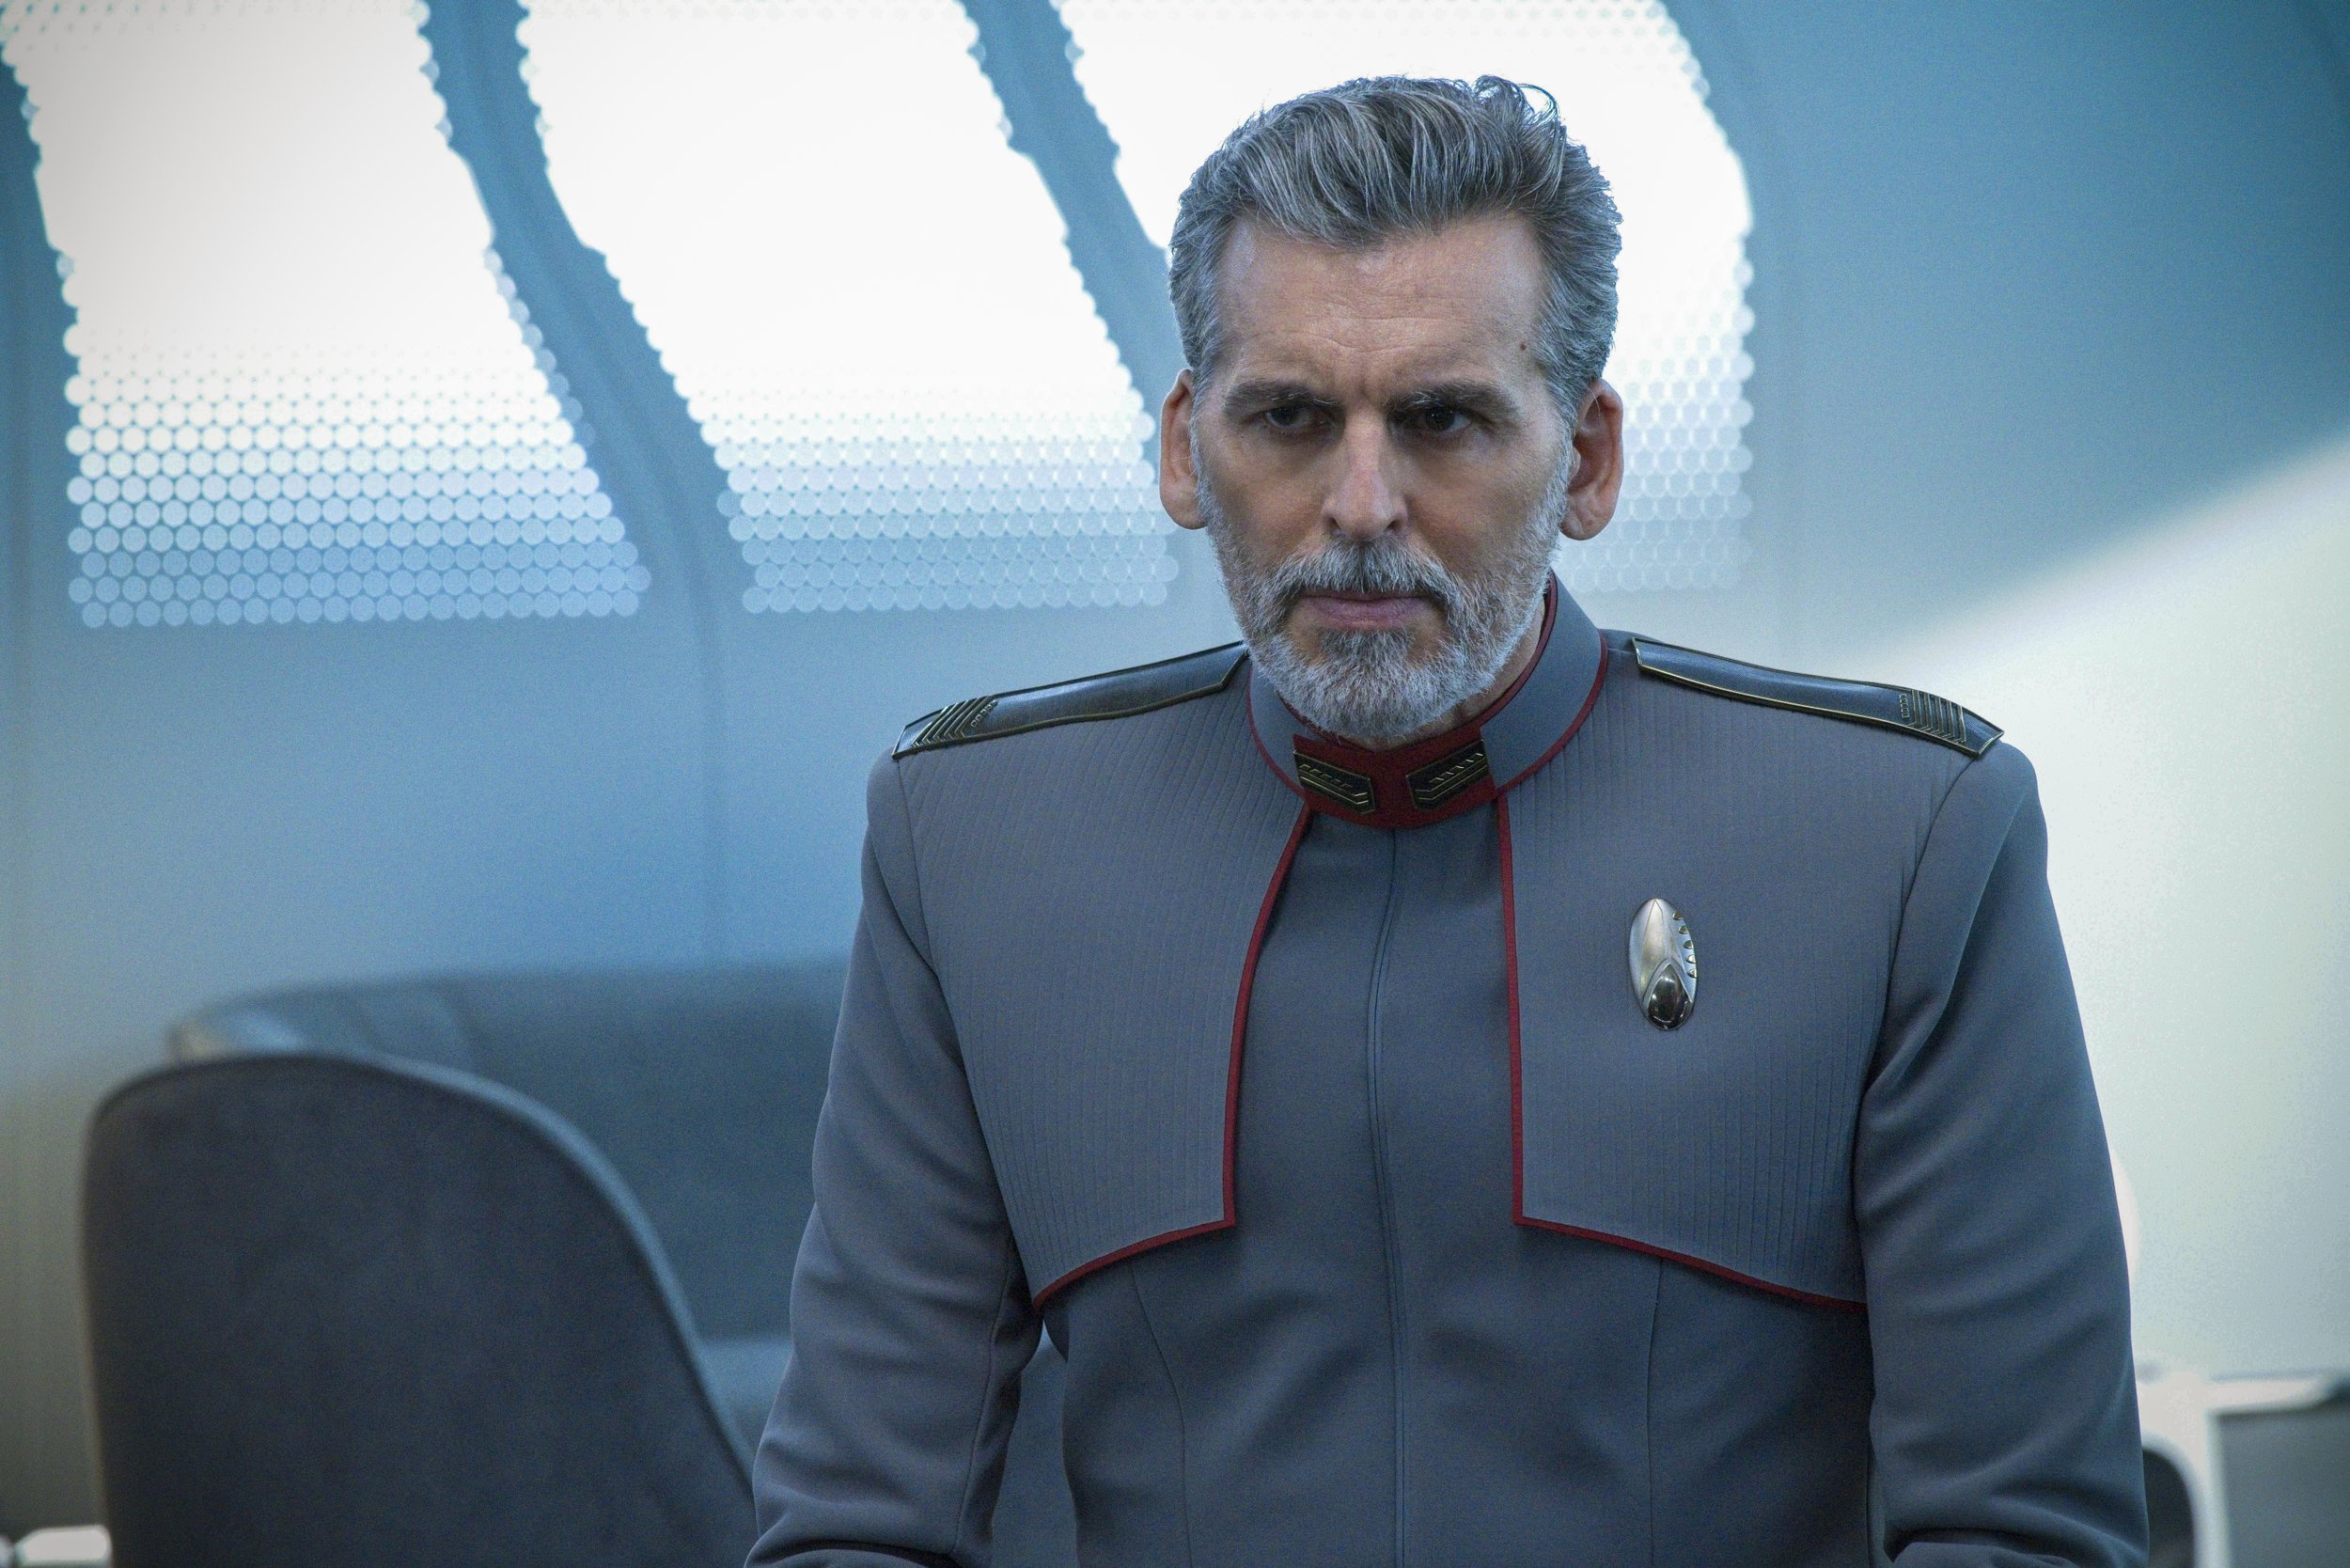   Pictured: Oded Fehr as Admiral Vance of the Paramount+ original series STAR TREK: DISCOVERY. Photo Cr: Michael Gibson/Paramount+ © 2021 CBS Interactive. All Rights Reserved.  